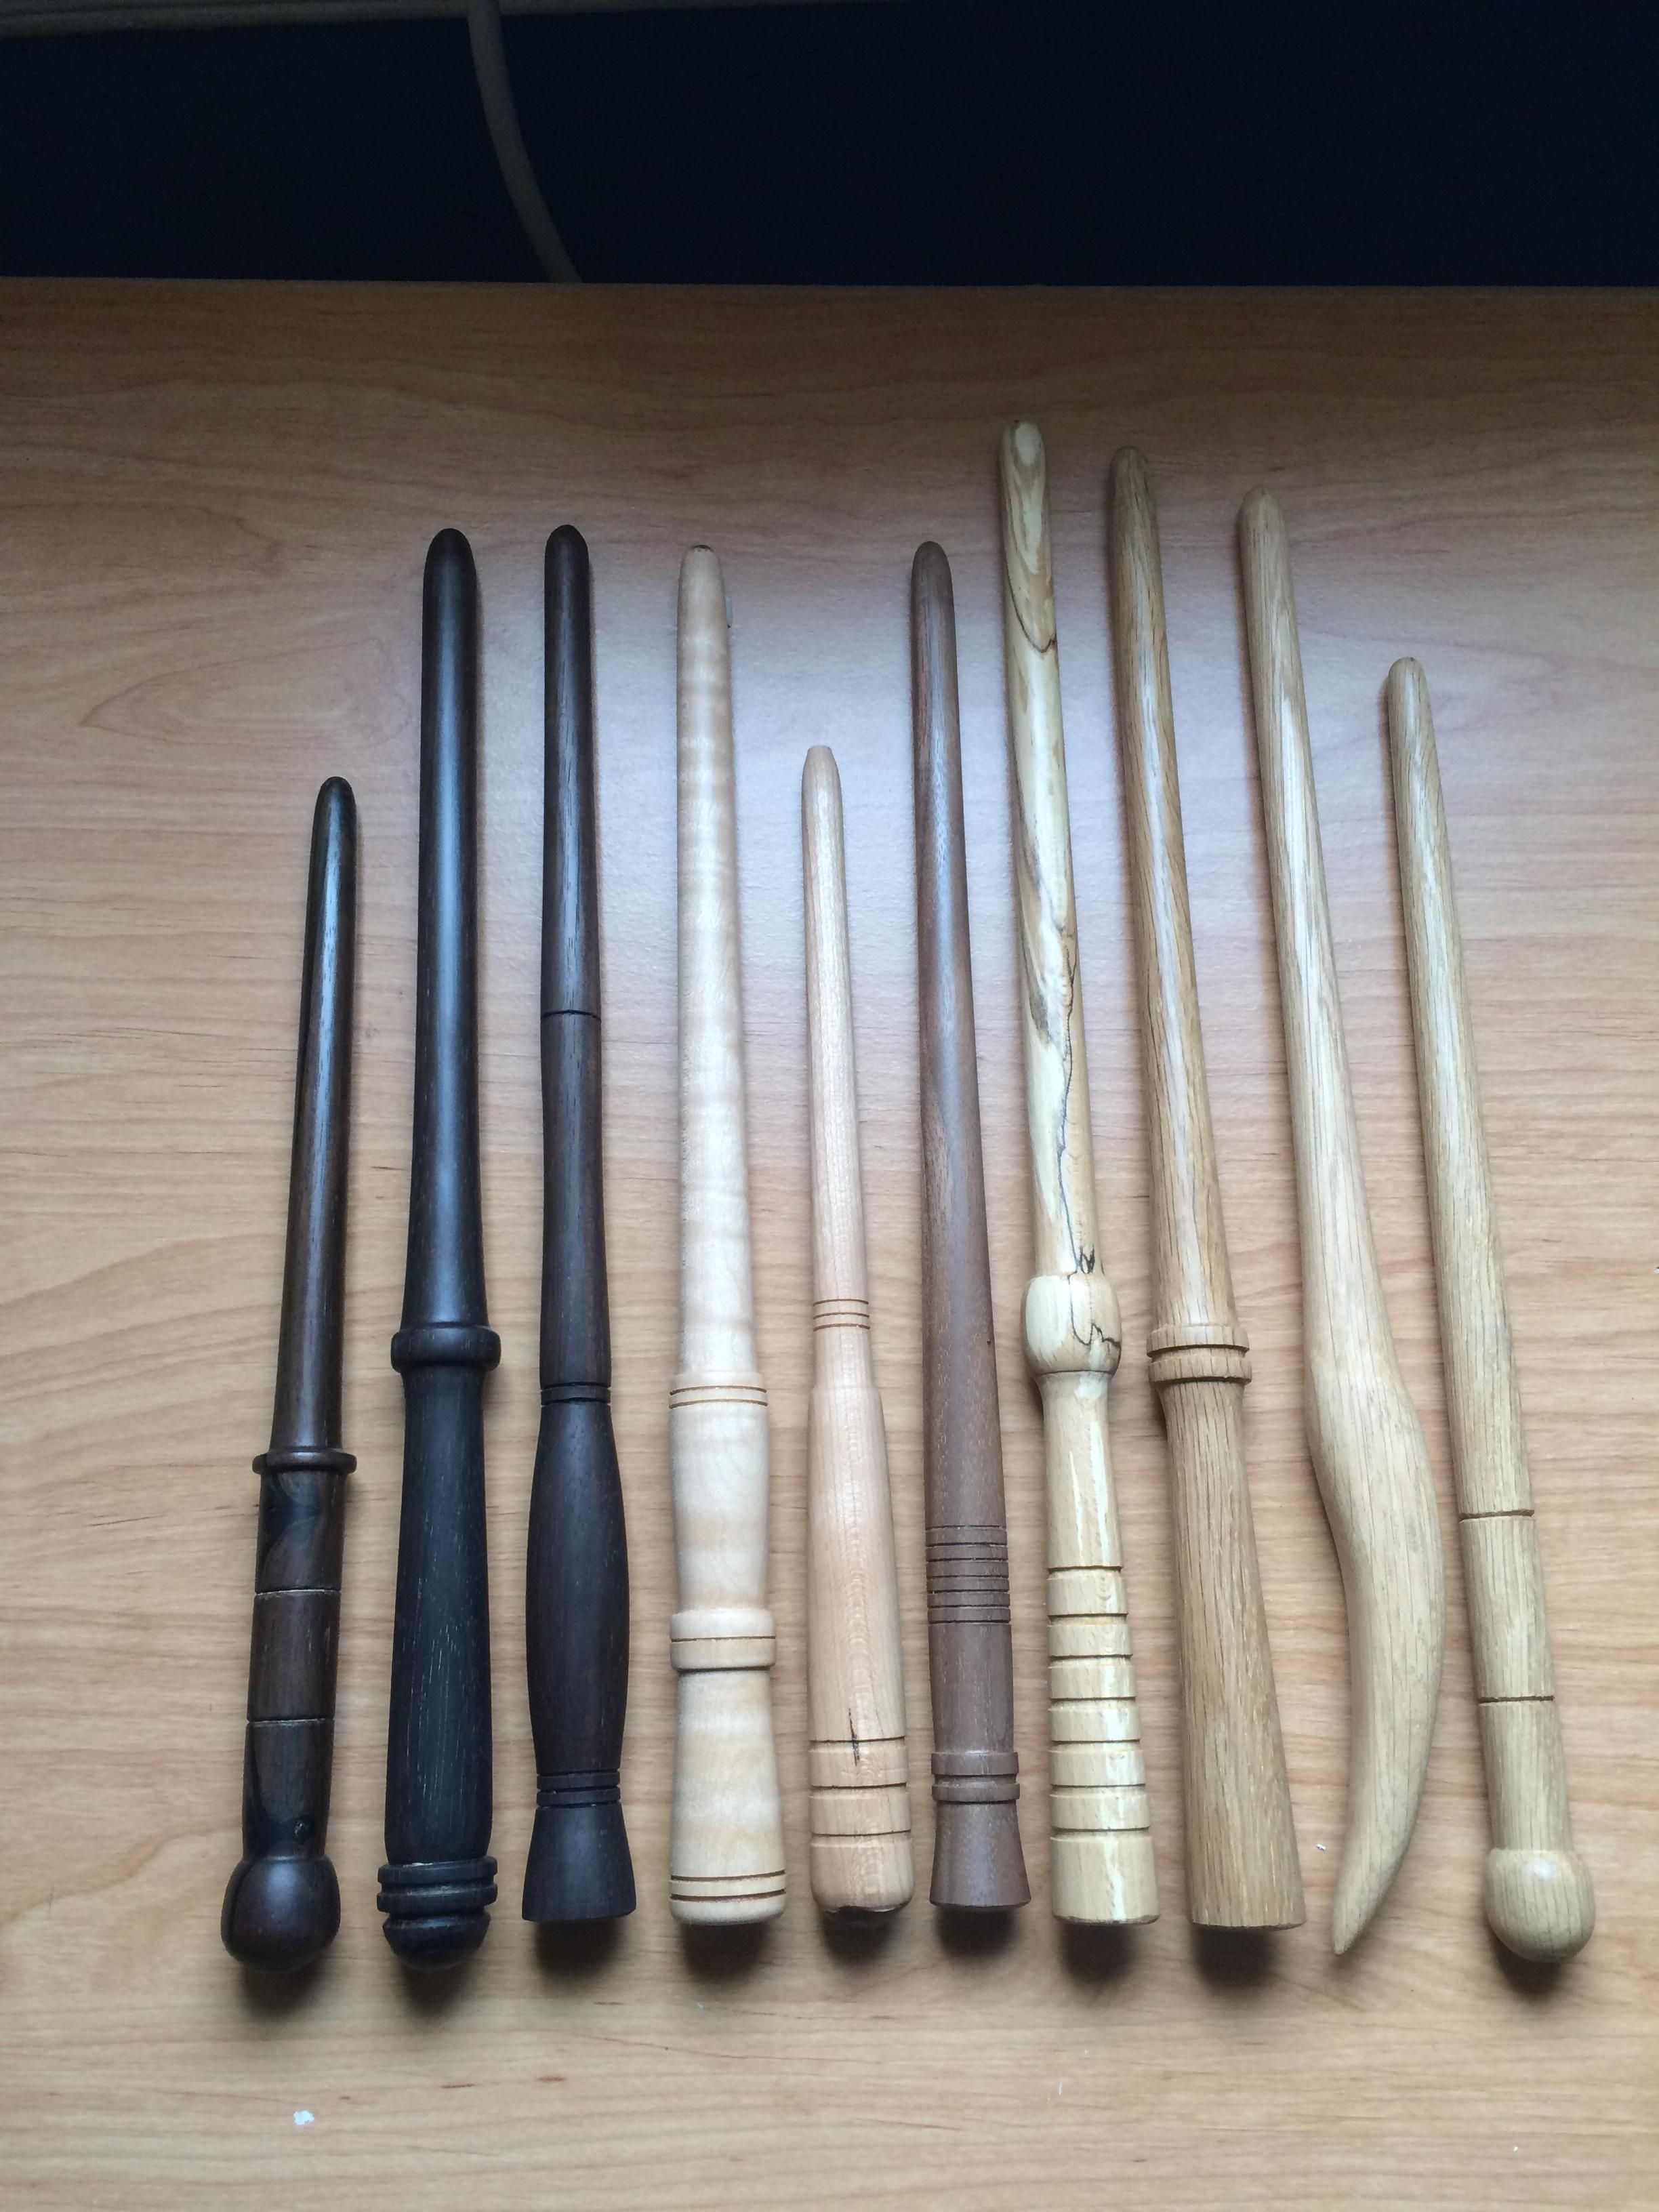 I made a set of Harry Potter inspired magic wands -   25 harry potter wands
 ideas